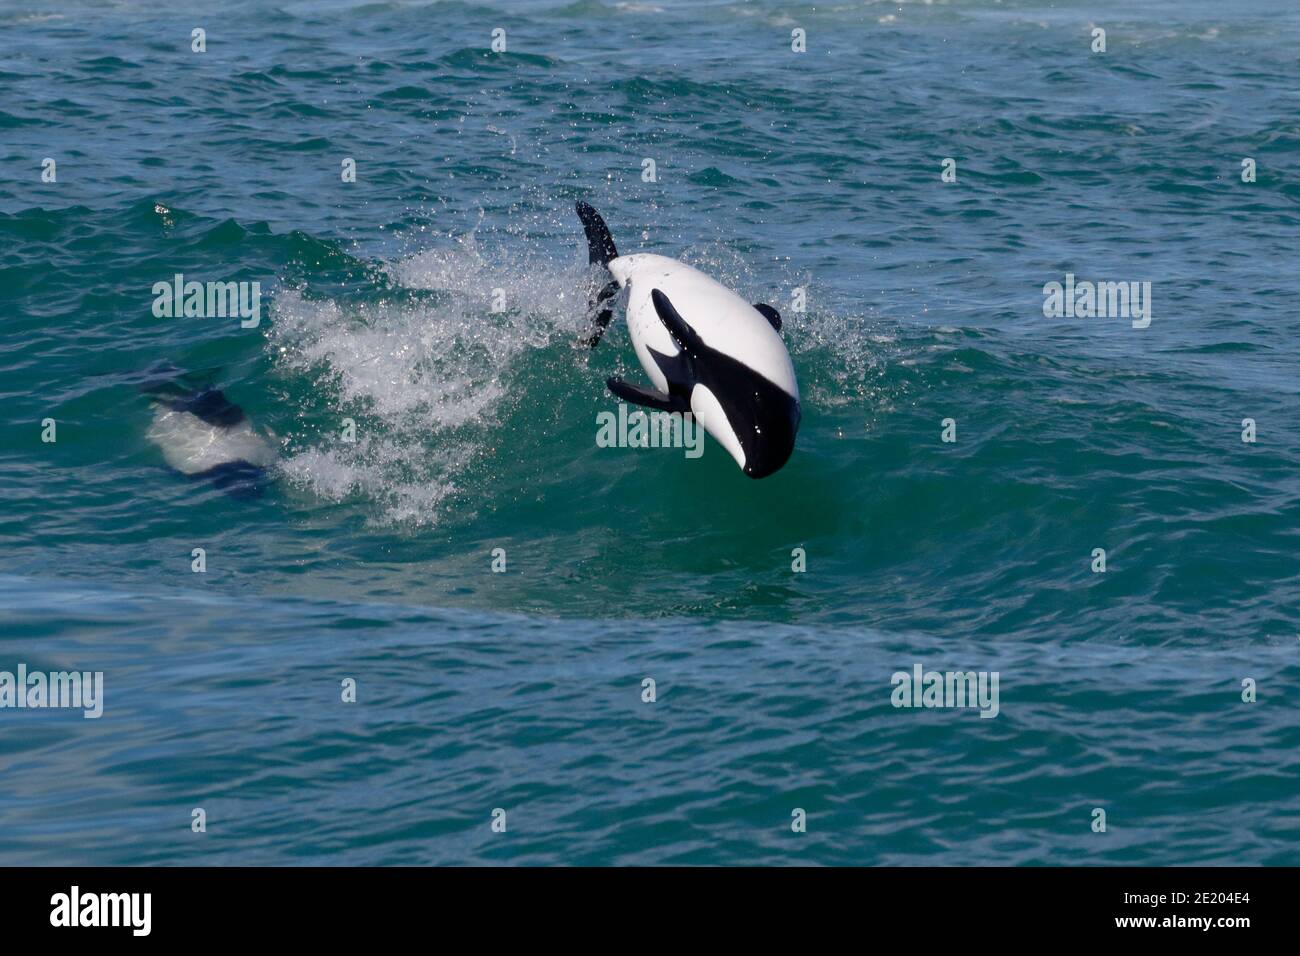 Commerson's Dolphin (Cephalorhychus commersonii), adult, Playa Union, Rawson, Chubut Province, Argentina 26th Nov 2015 Stock Photo